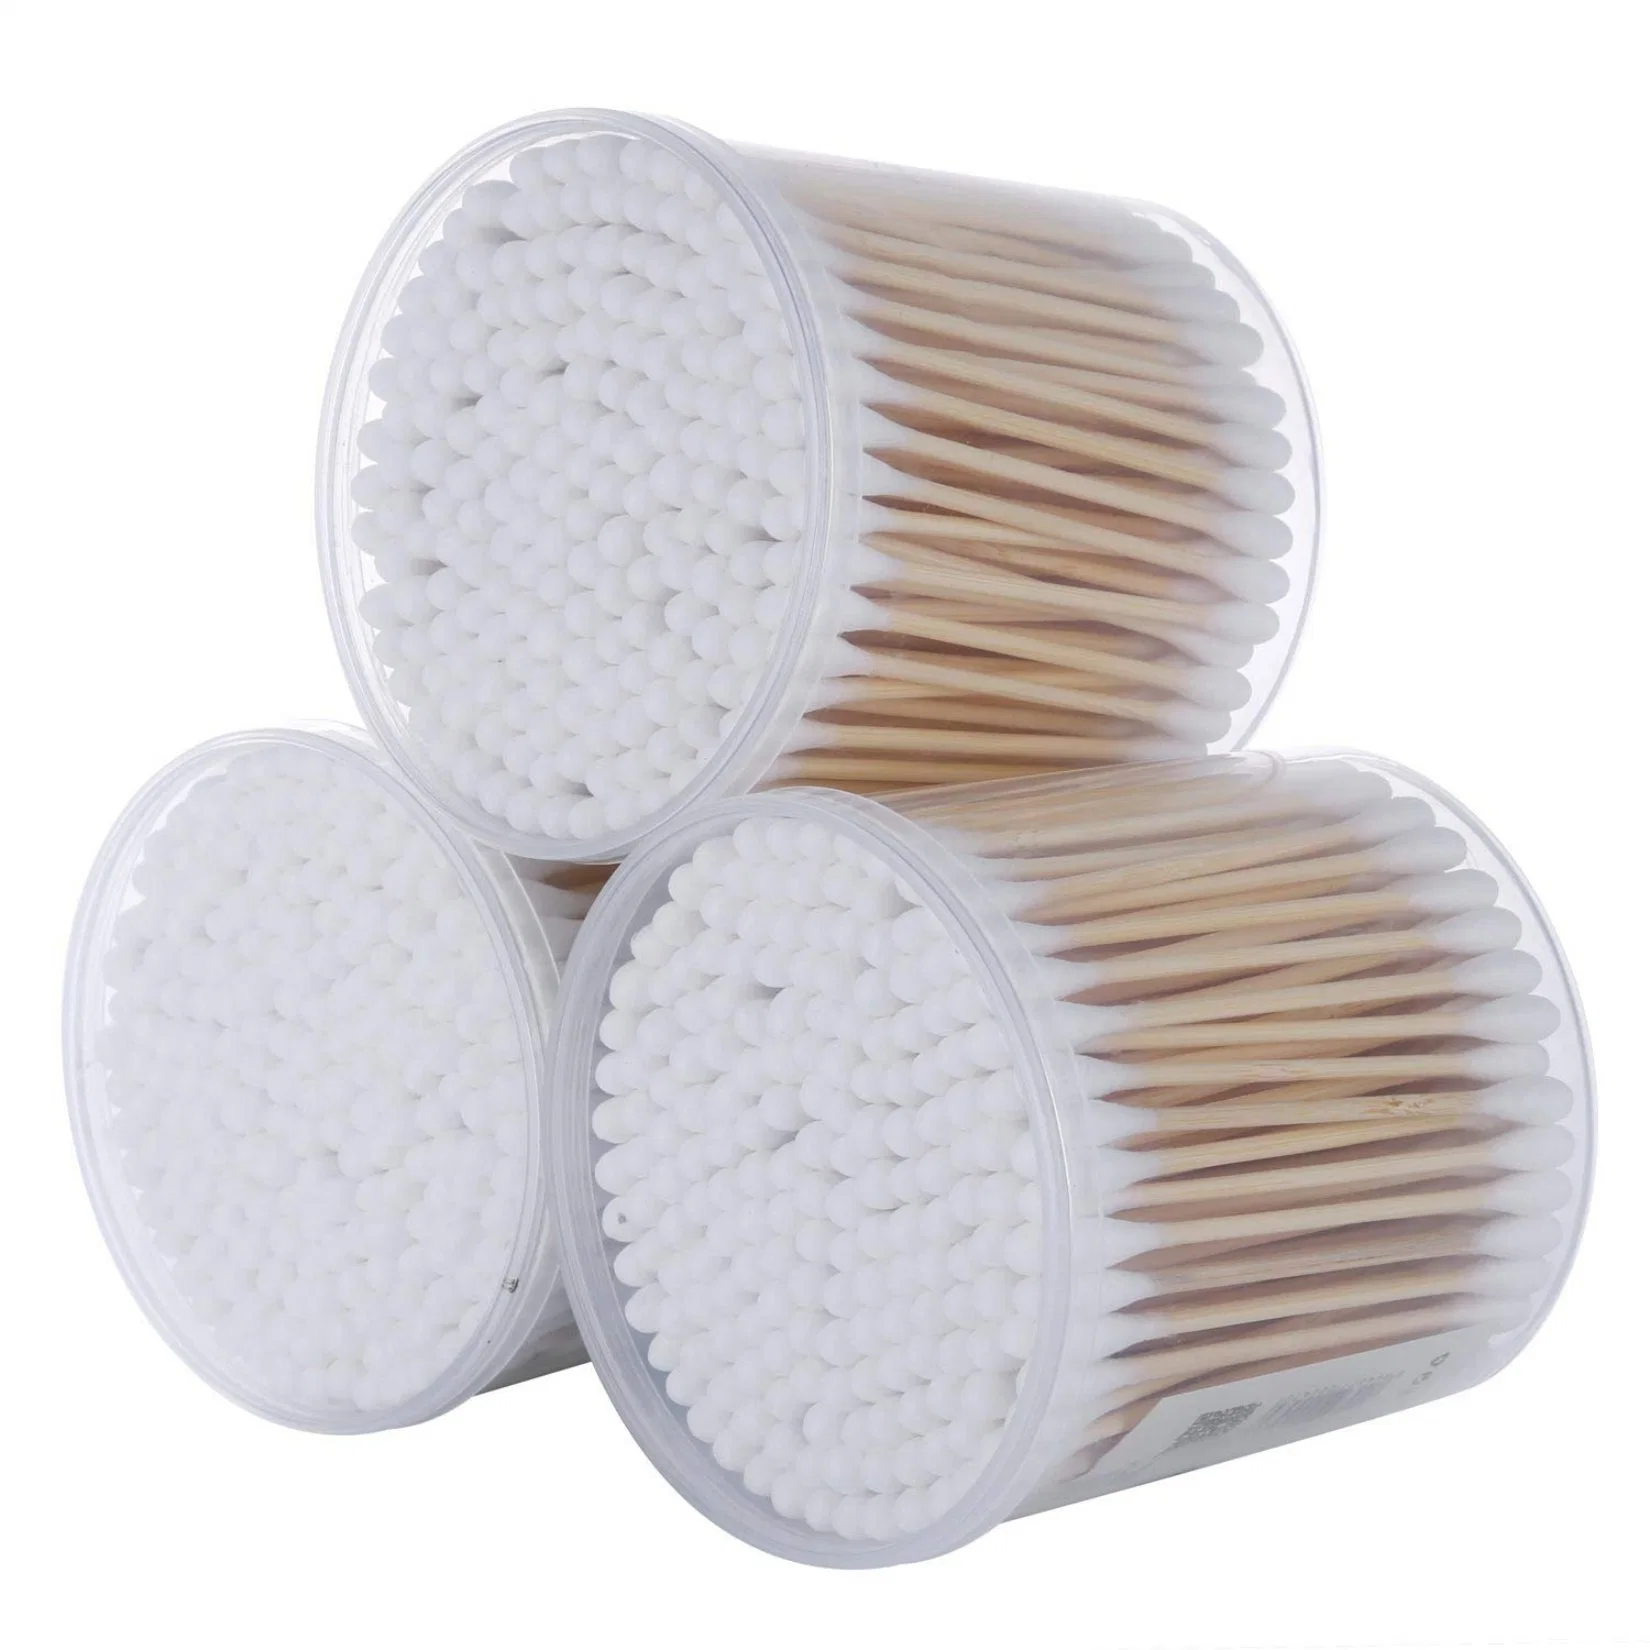 Medical Disposable Wooden Bamboo Stick Double Head Cotton Swabs